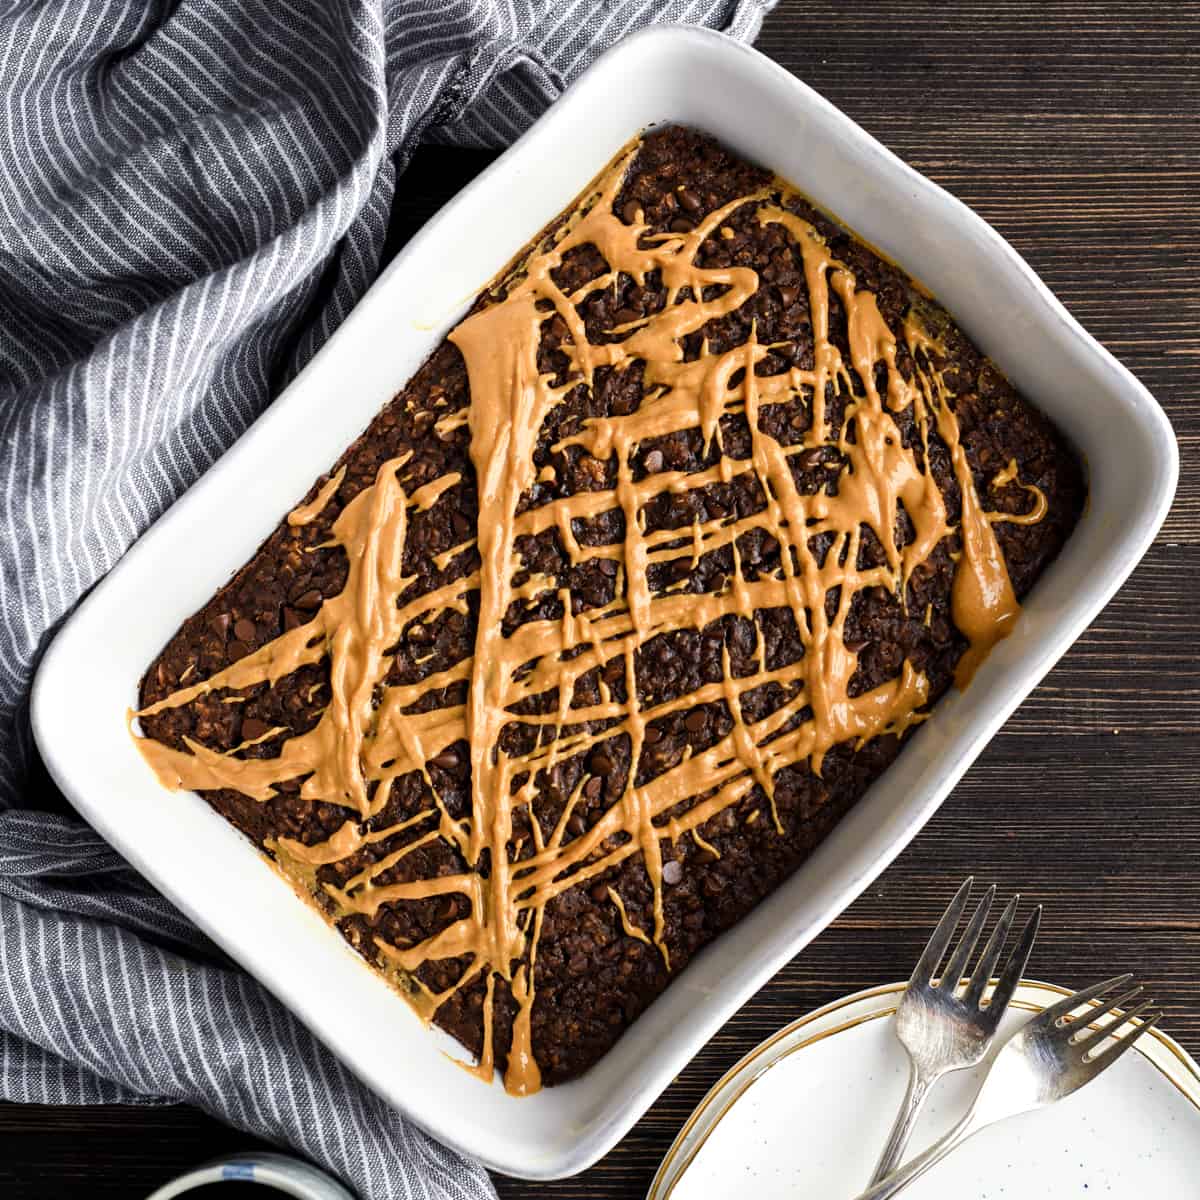 Overhead view of Healthy Chocolate Peanut Butter Baked Oatmeal with a peanut butter drizzle